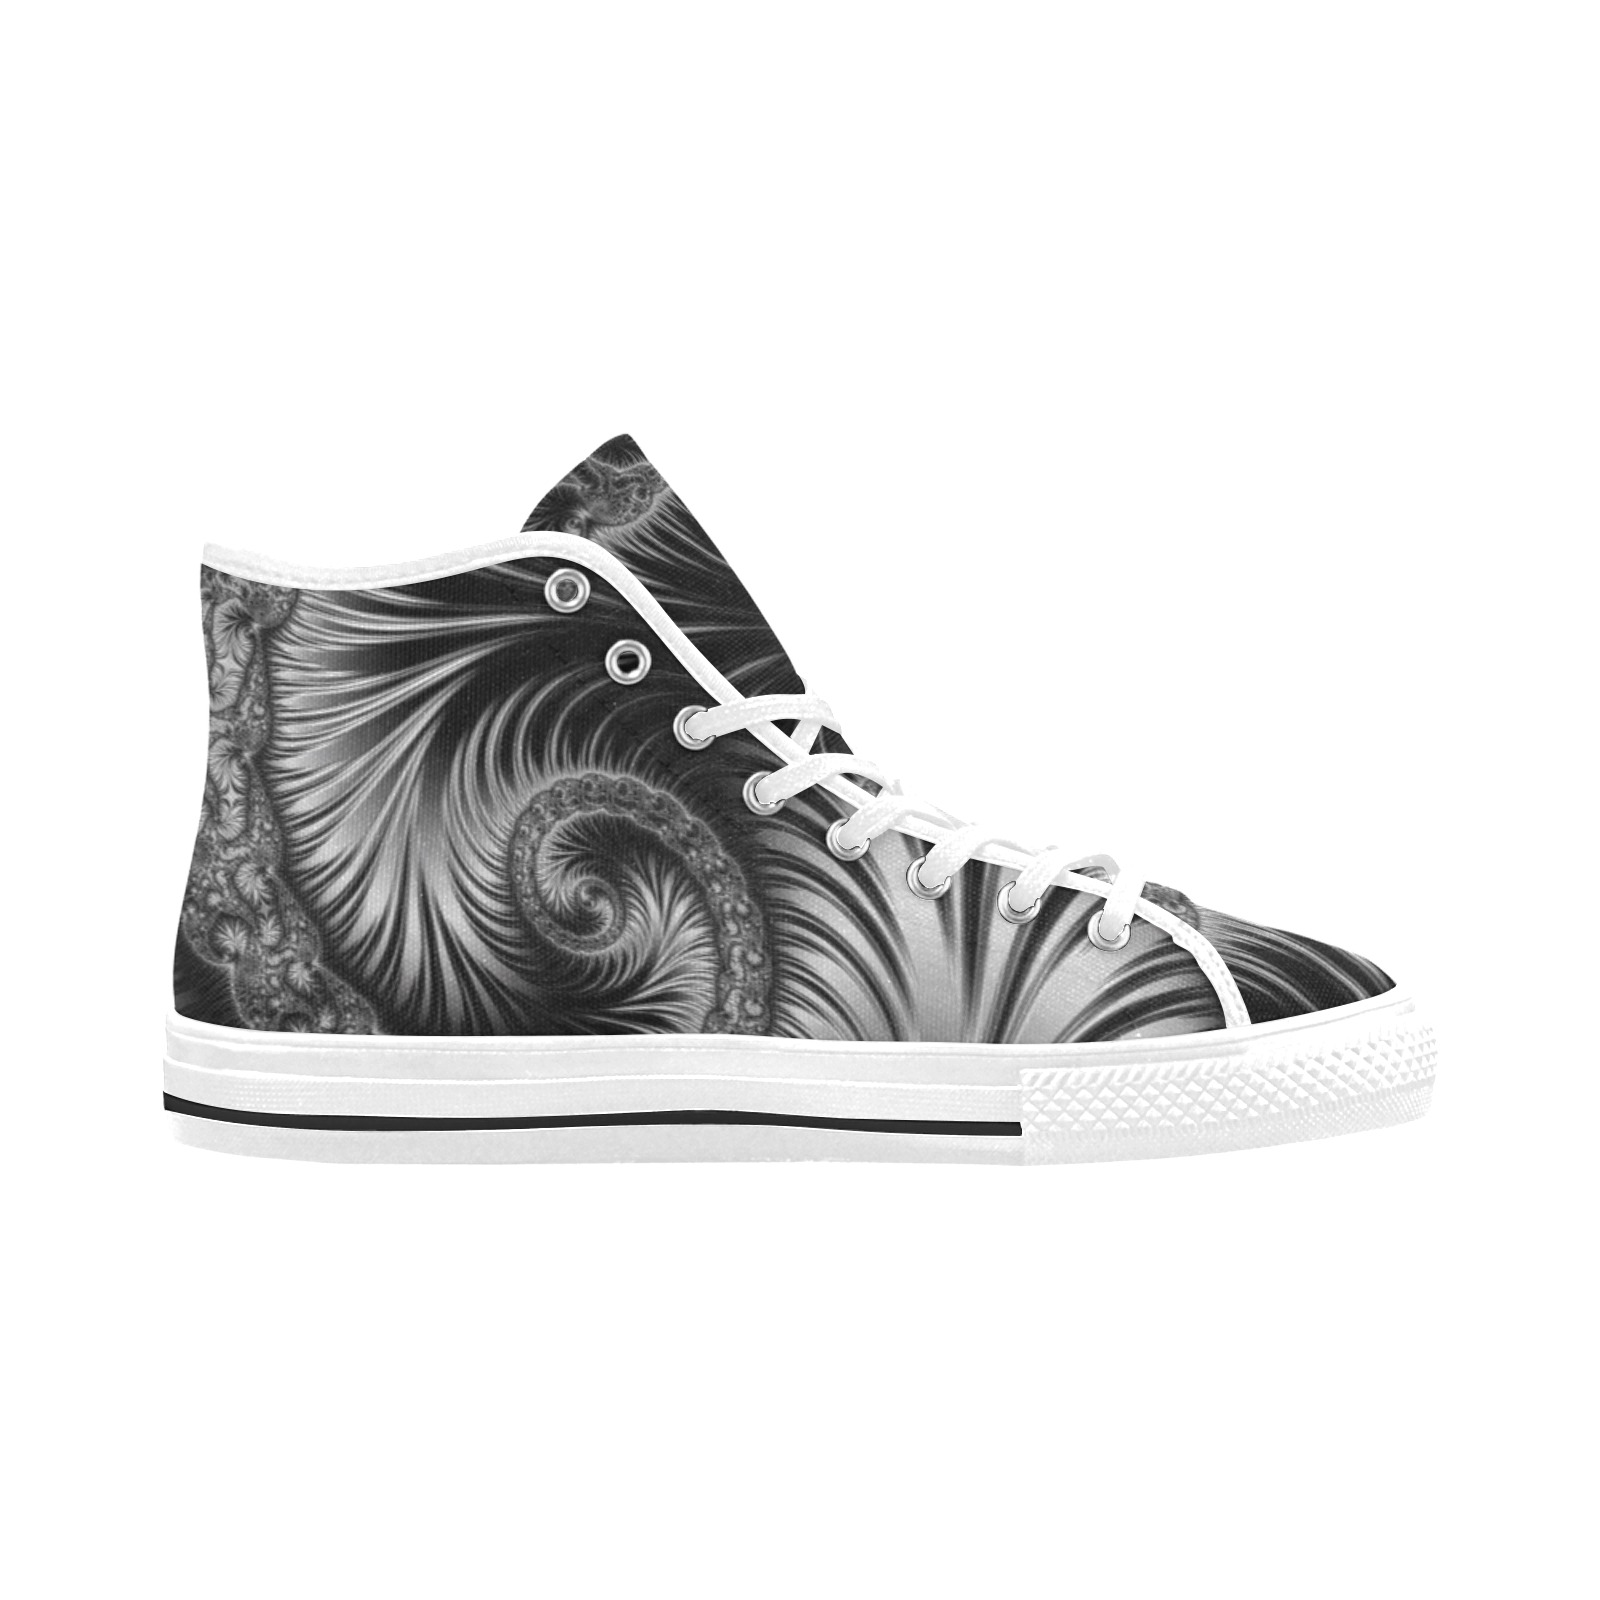 Black and Silver Spiral Fractal Abstract Vancouver H Women's Canvas Shoes (1013-1)